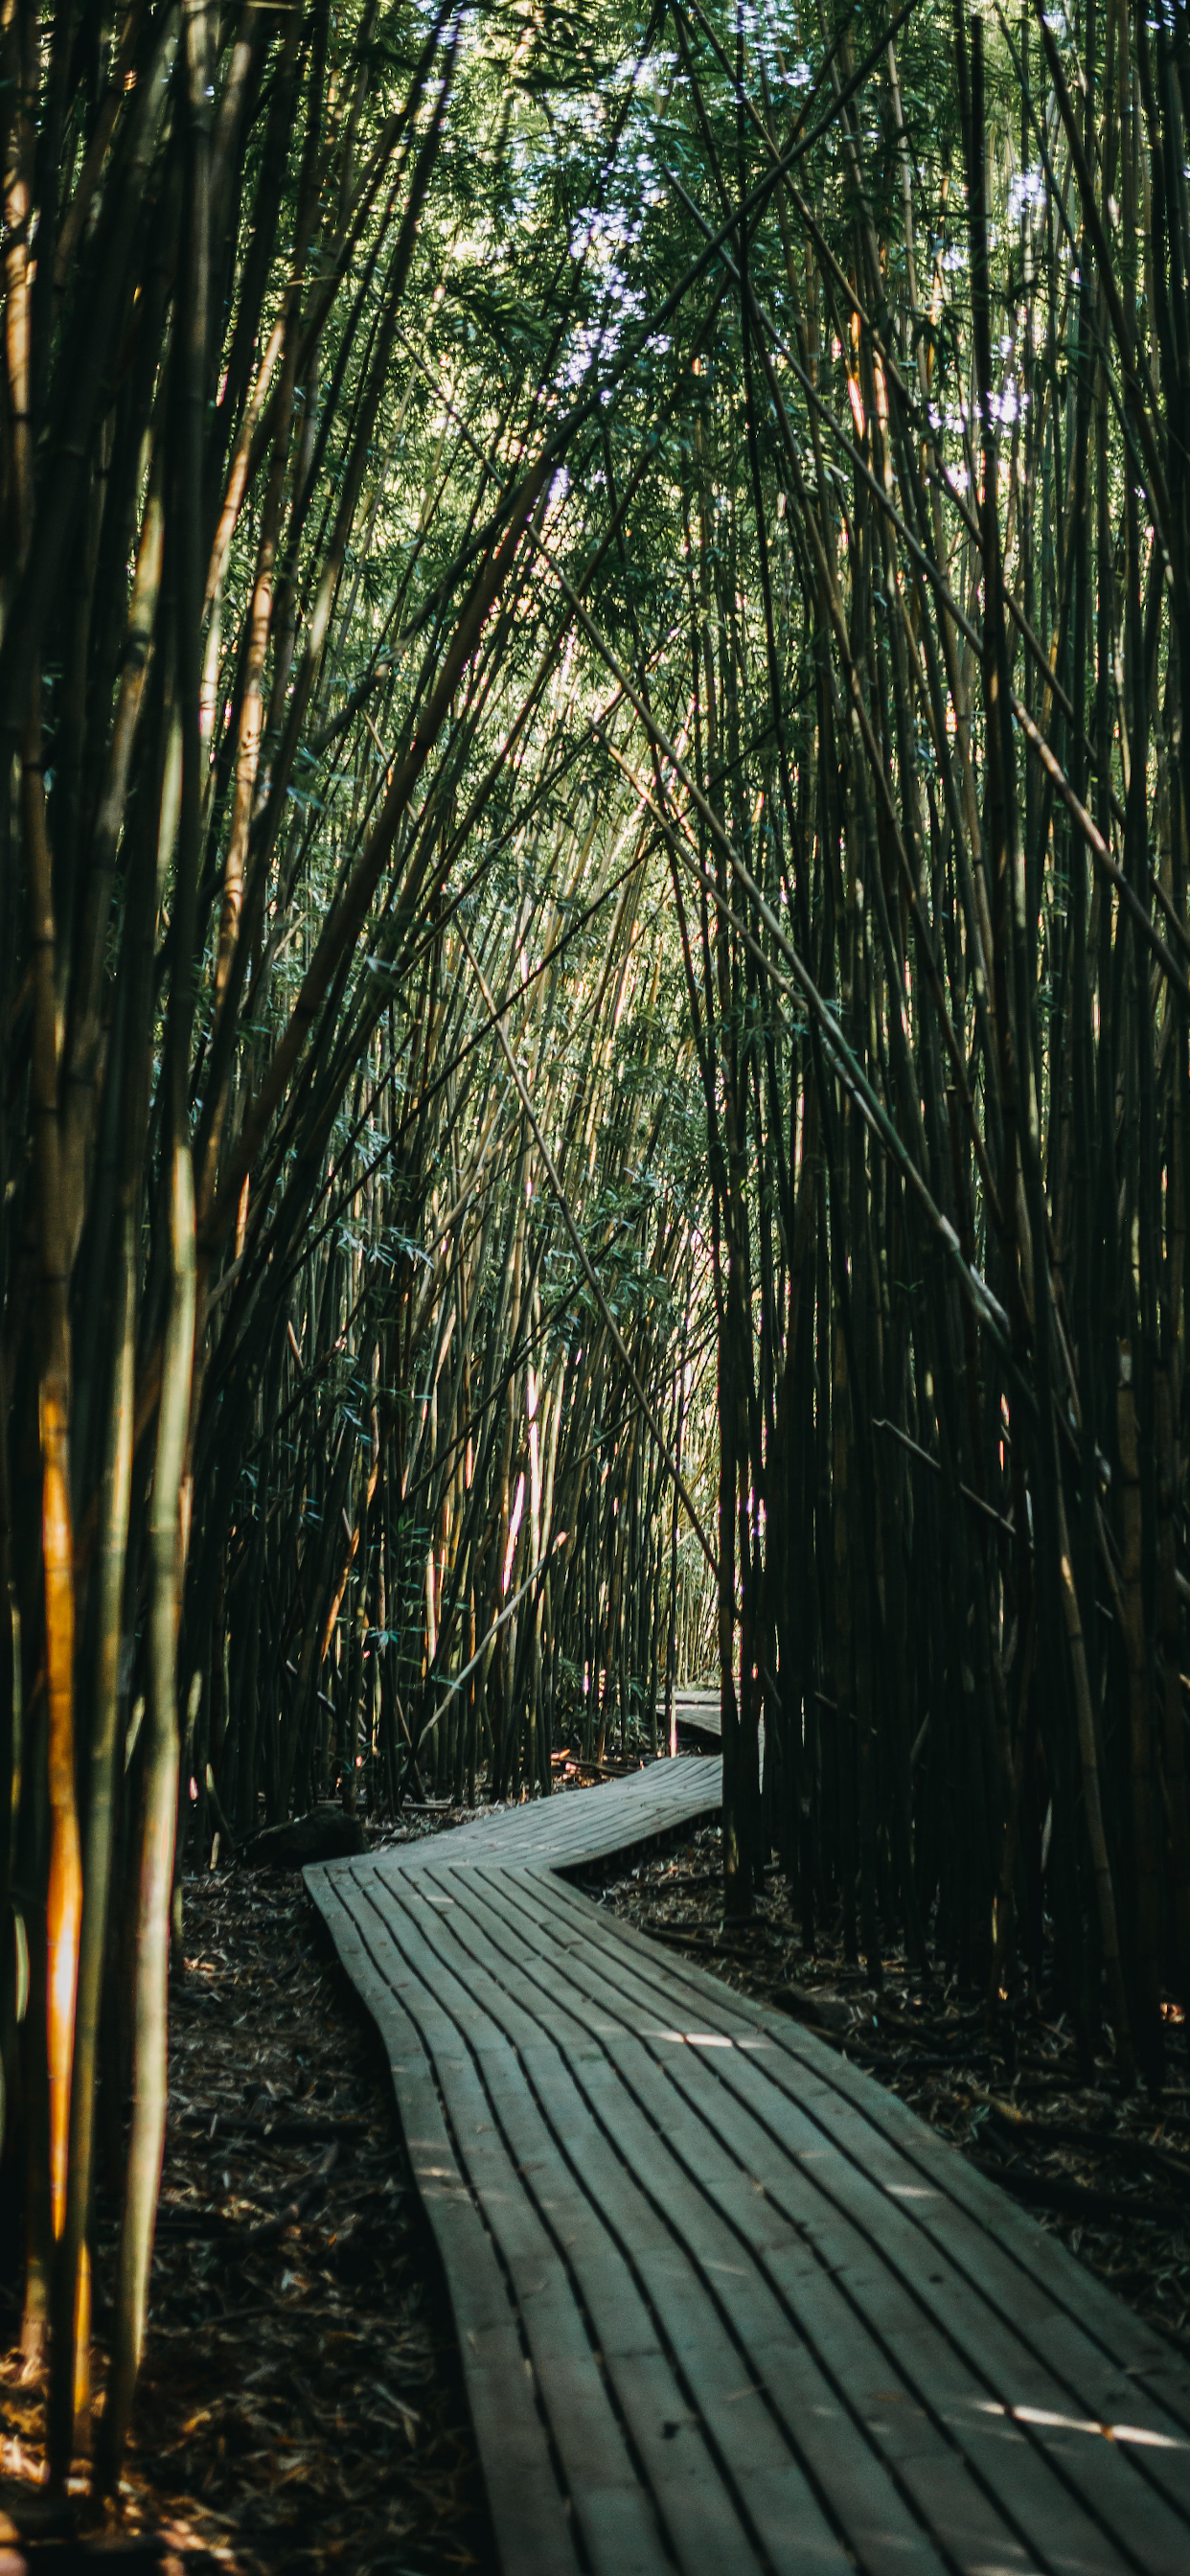 Bamboo forest Wallpaper art: Free HD Download